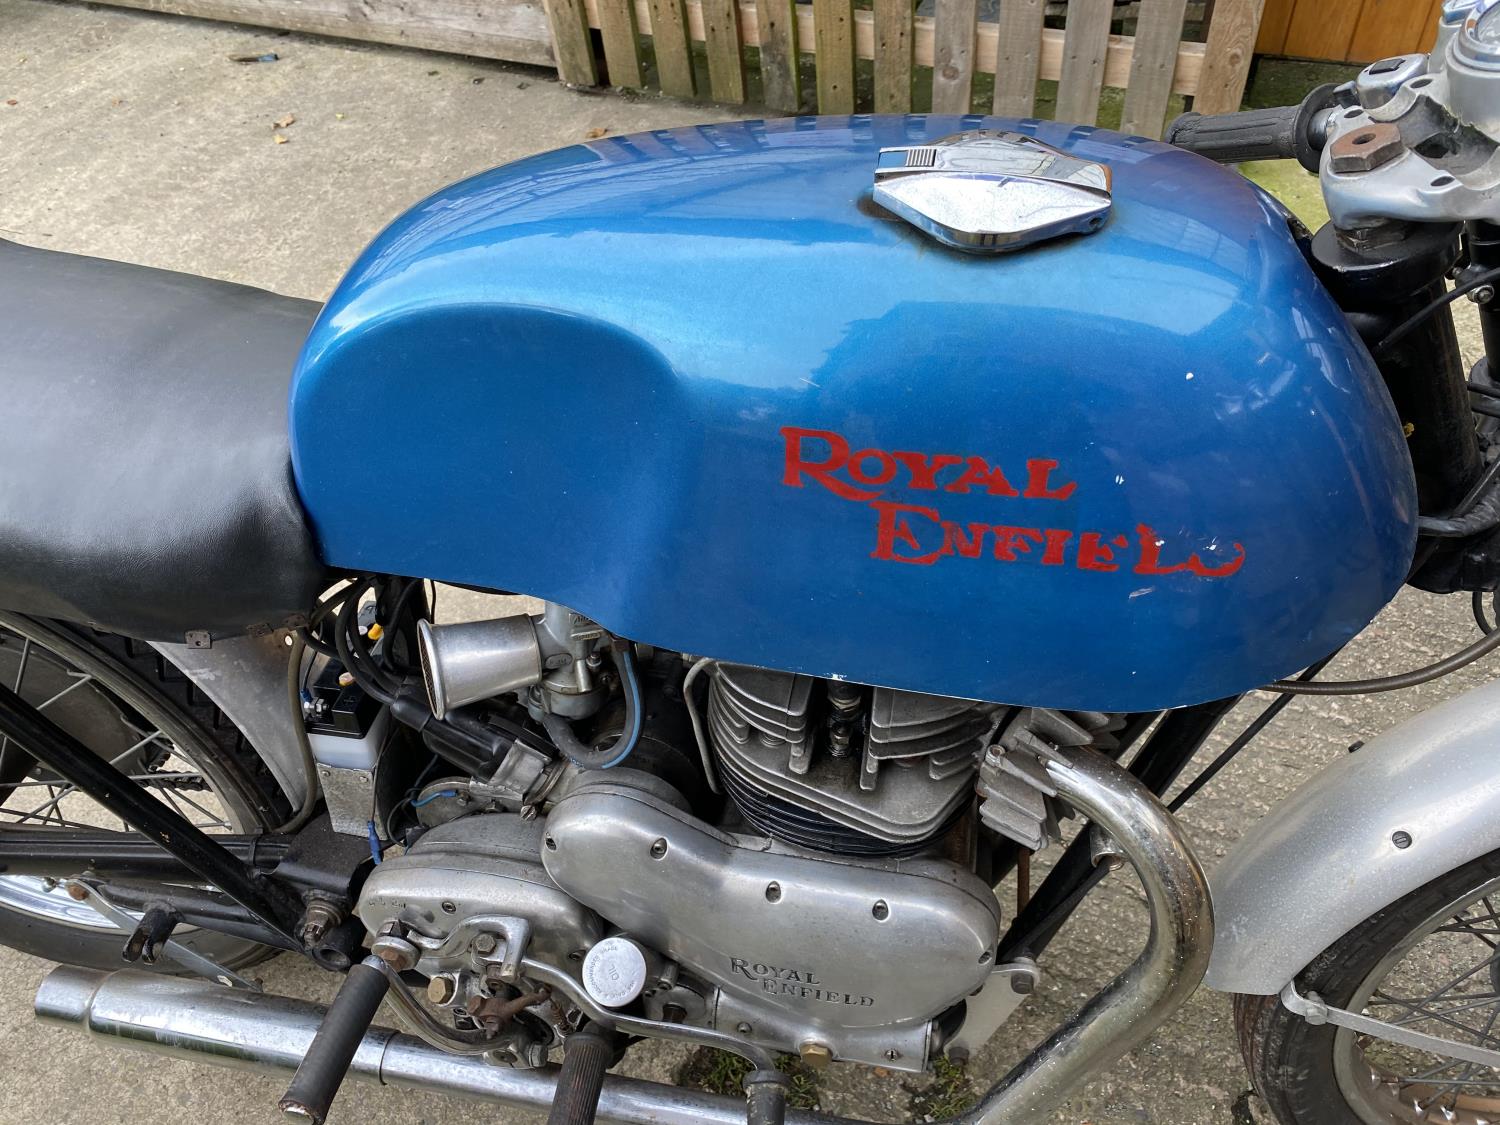 A ROYAL ENFIELD 700 CC TWIN CYLINDER MOTORCYCLE, REGISTERED IN 1974 - Image 5 of 14